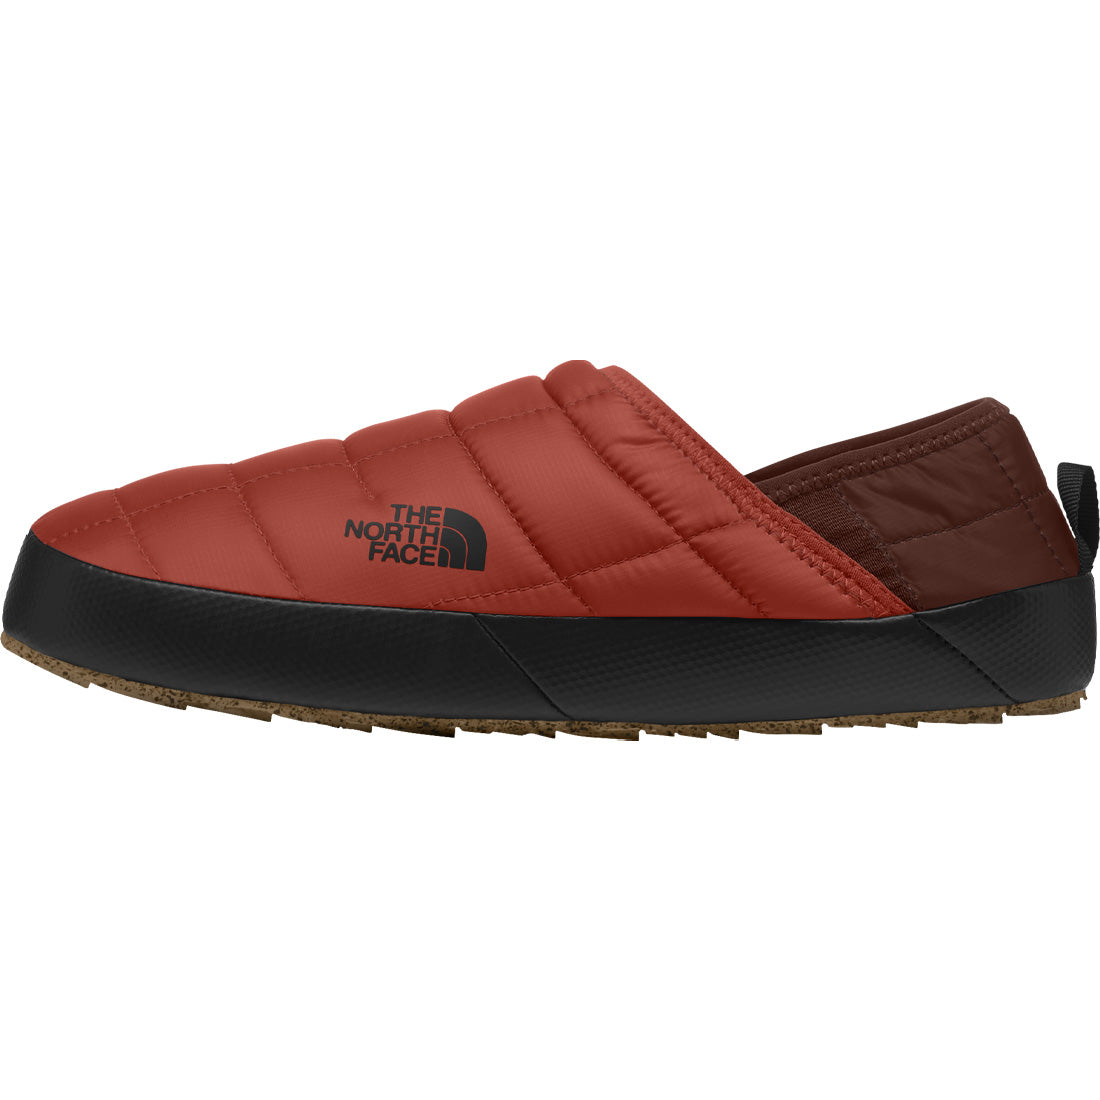 The North Face Thermoball Traction Mule V - Men's